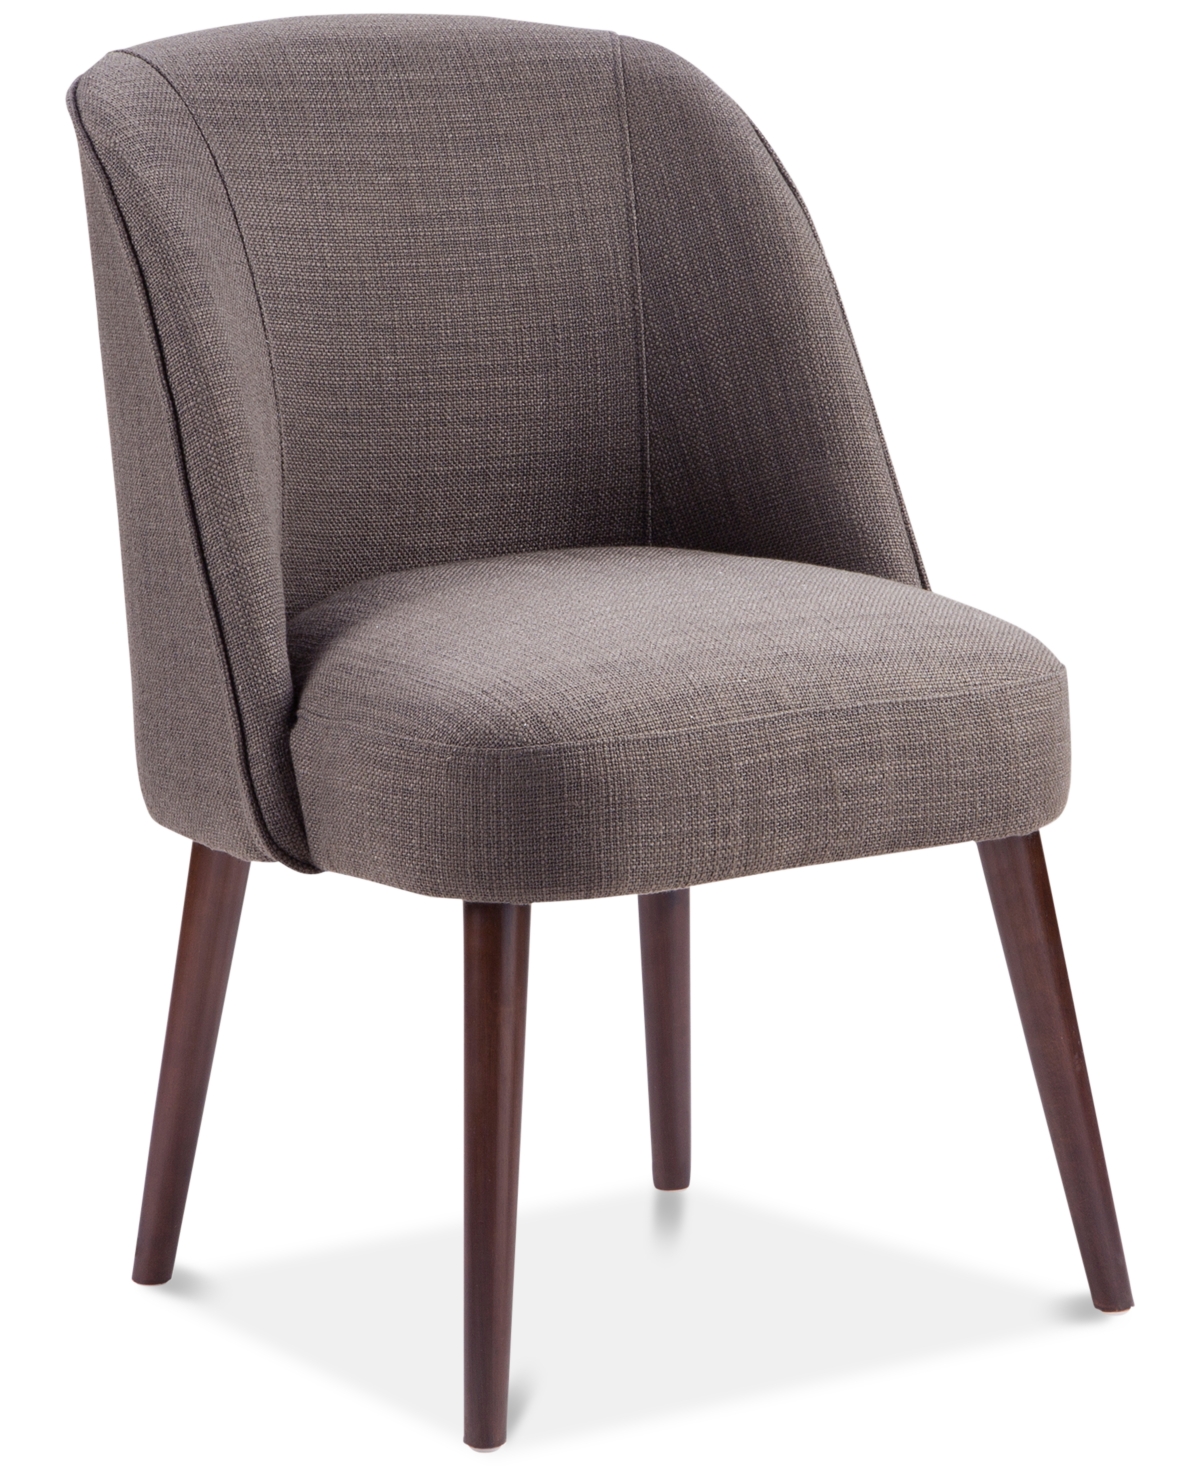 Bradley Rounded Back Dining Chair